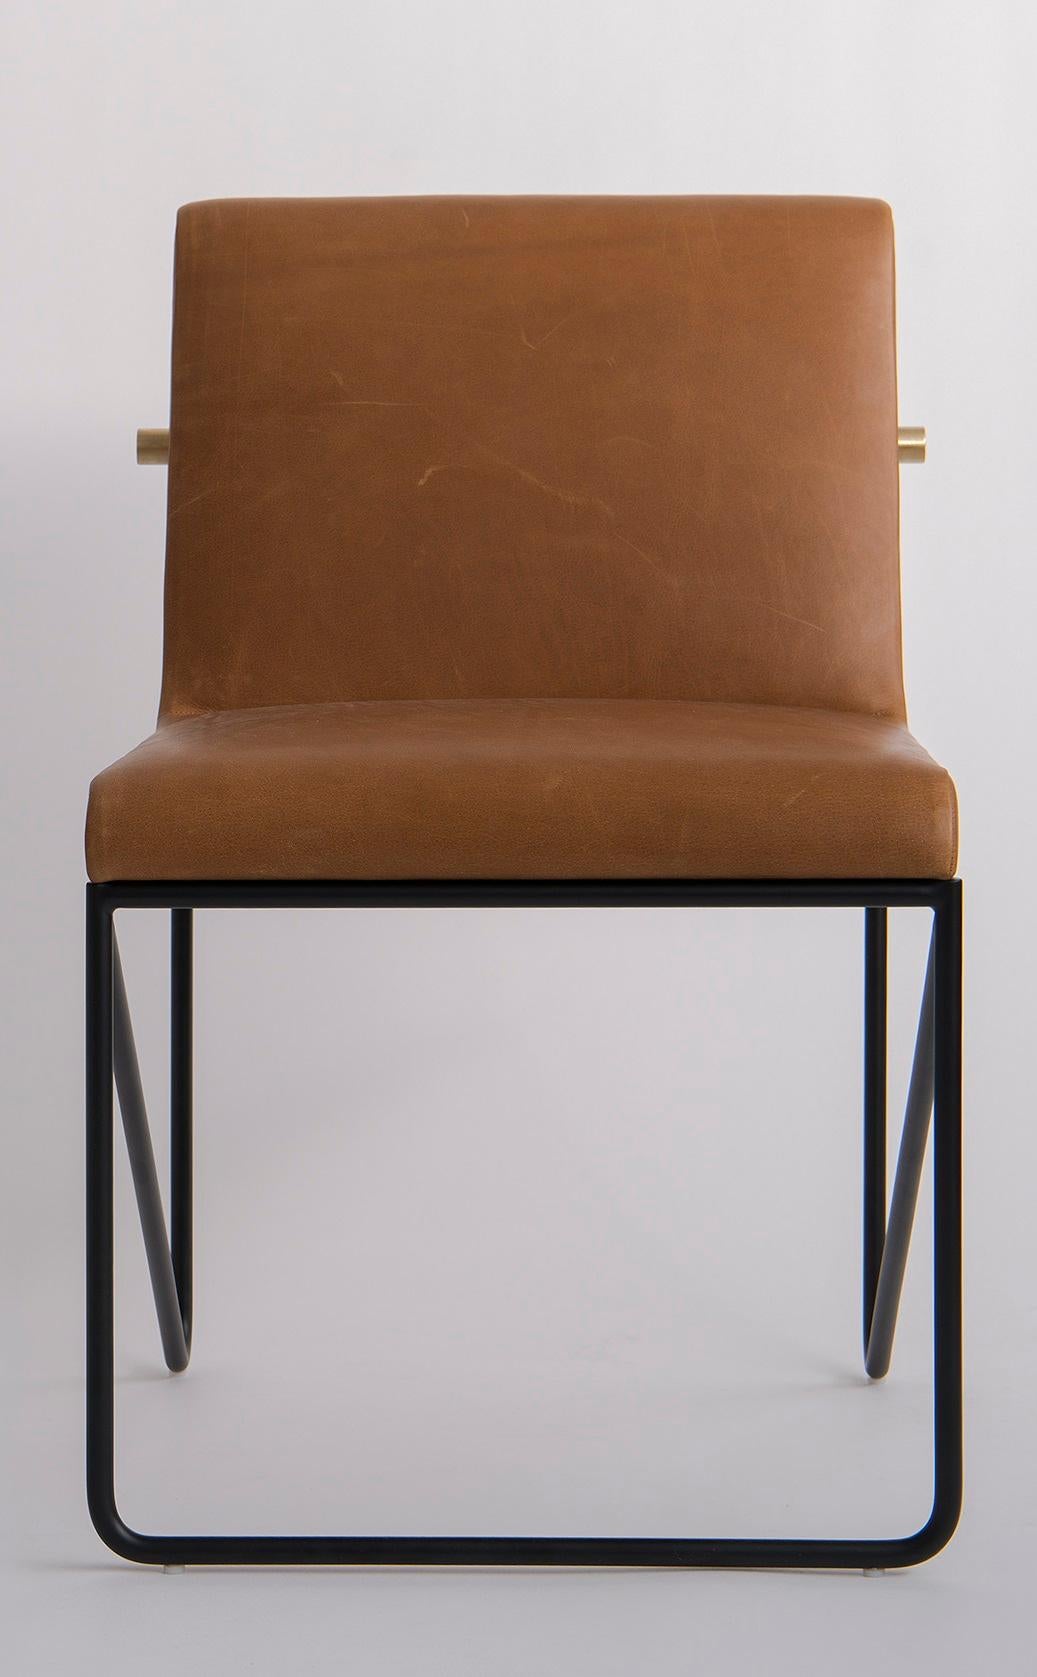 Kickstand Armless Side Chair by Phase Design
Dimensions: D 63.5 x W 55.9 x H 79.4 cm. 
Materials: Leather, powder-coated metal and brushed brass.

Solid steel bar available in a flat black or white powder coat finish with solid brushed brass bar and